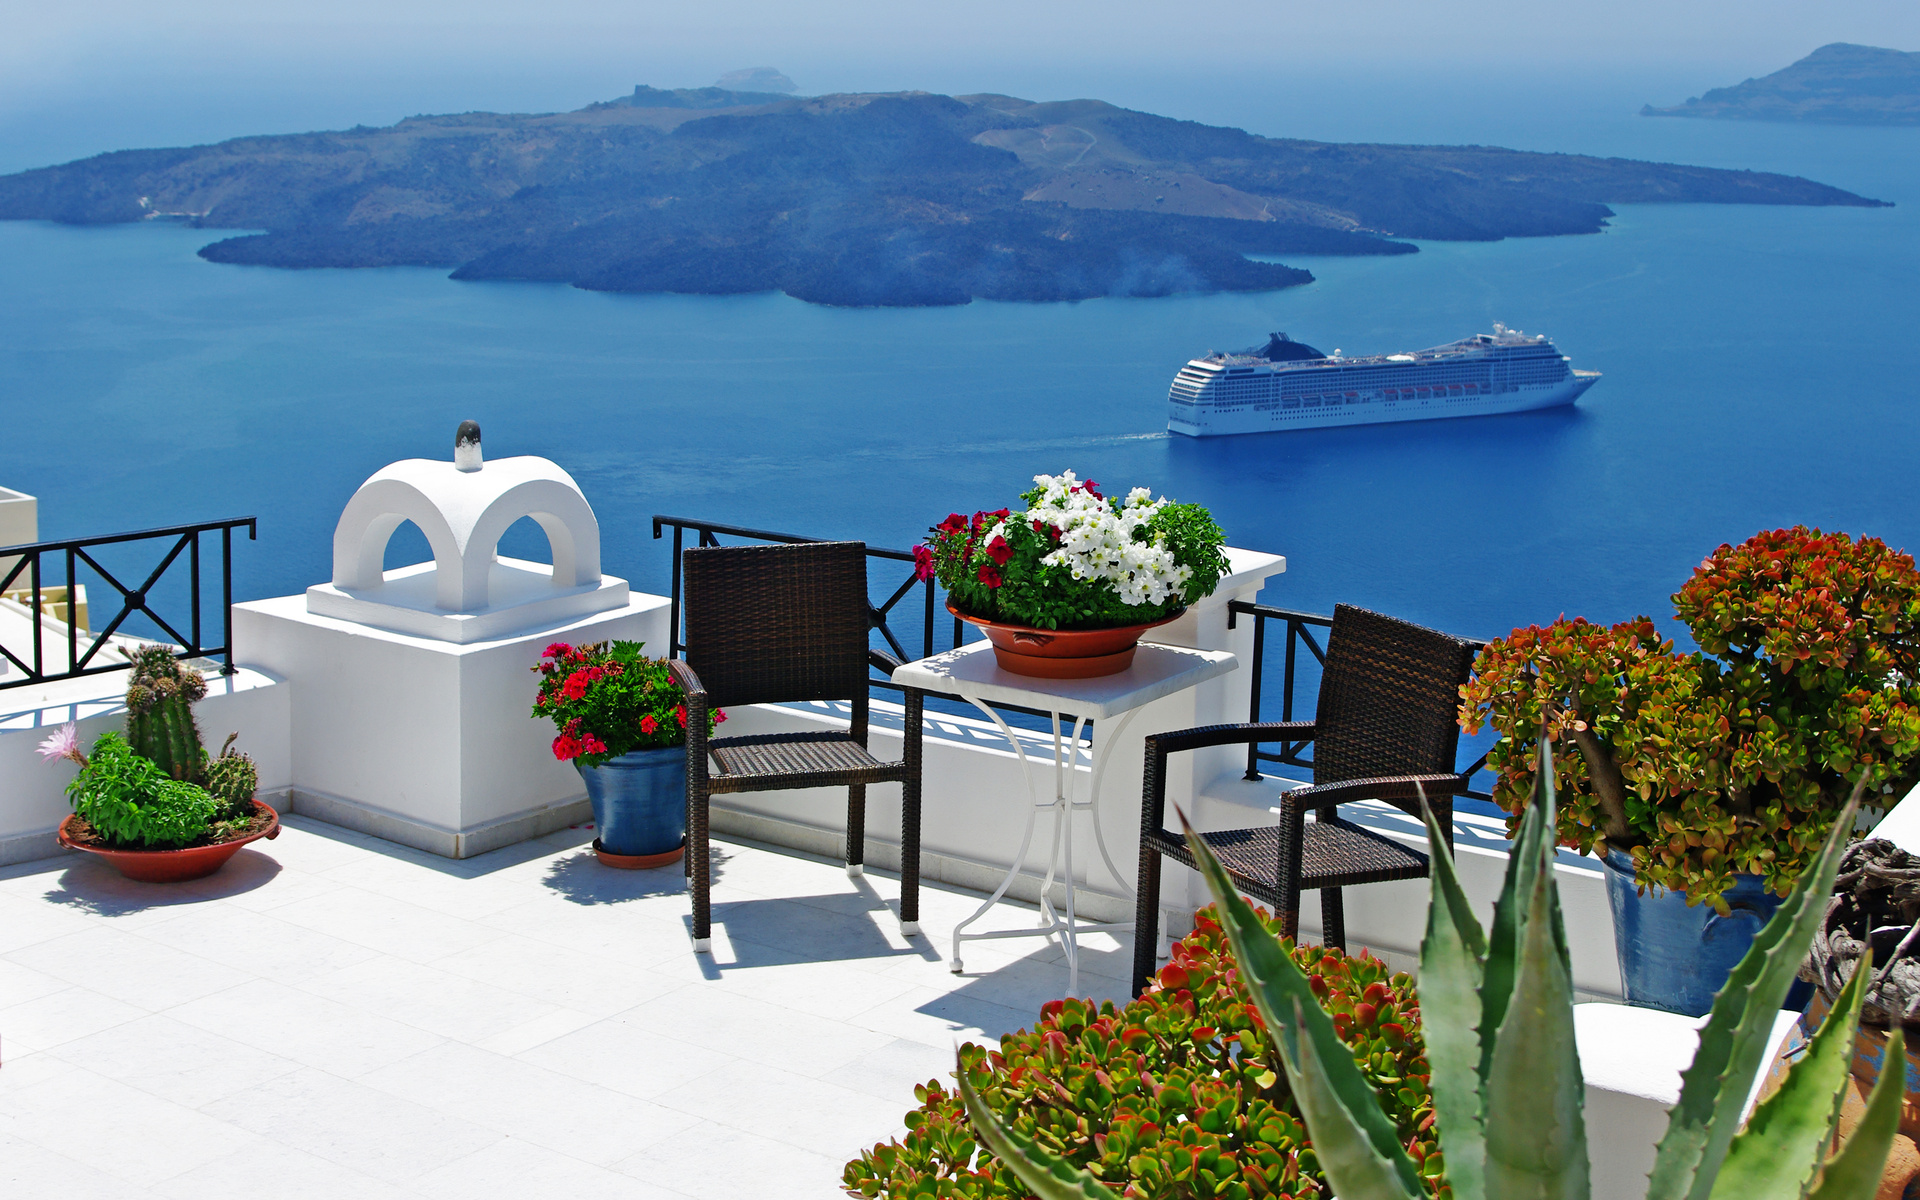 greece, Balcony, Architecture, Buildings, Flowers, Plants, Furniture, View, Scenic, Panoramic, Island, Water, Ocean, Sea, Vehicles, Ships, Boat, Cruise, Photography, Place, Tropical Wallpaper